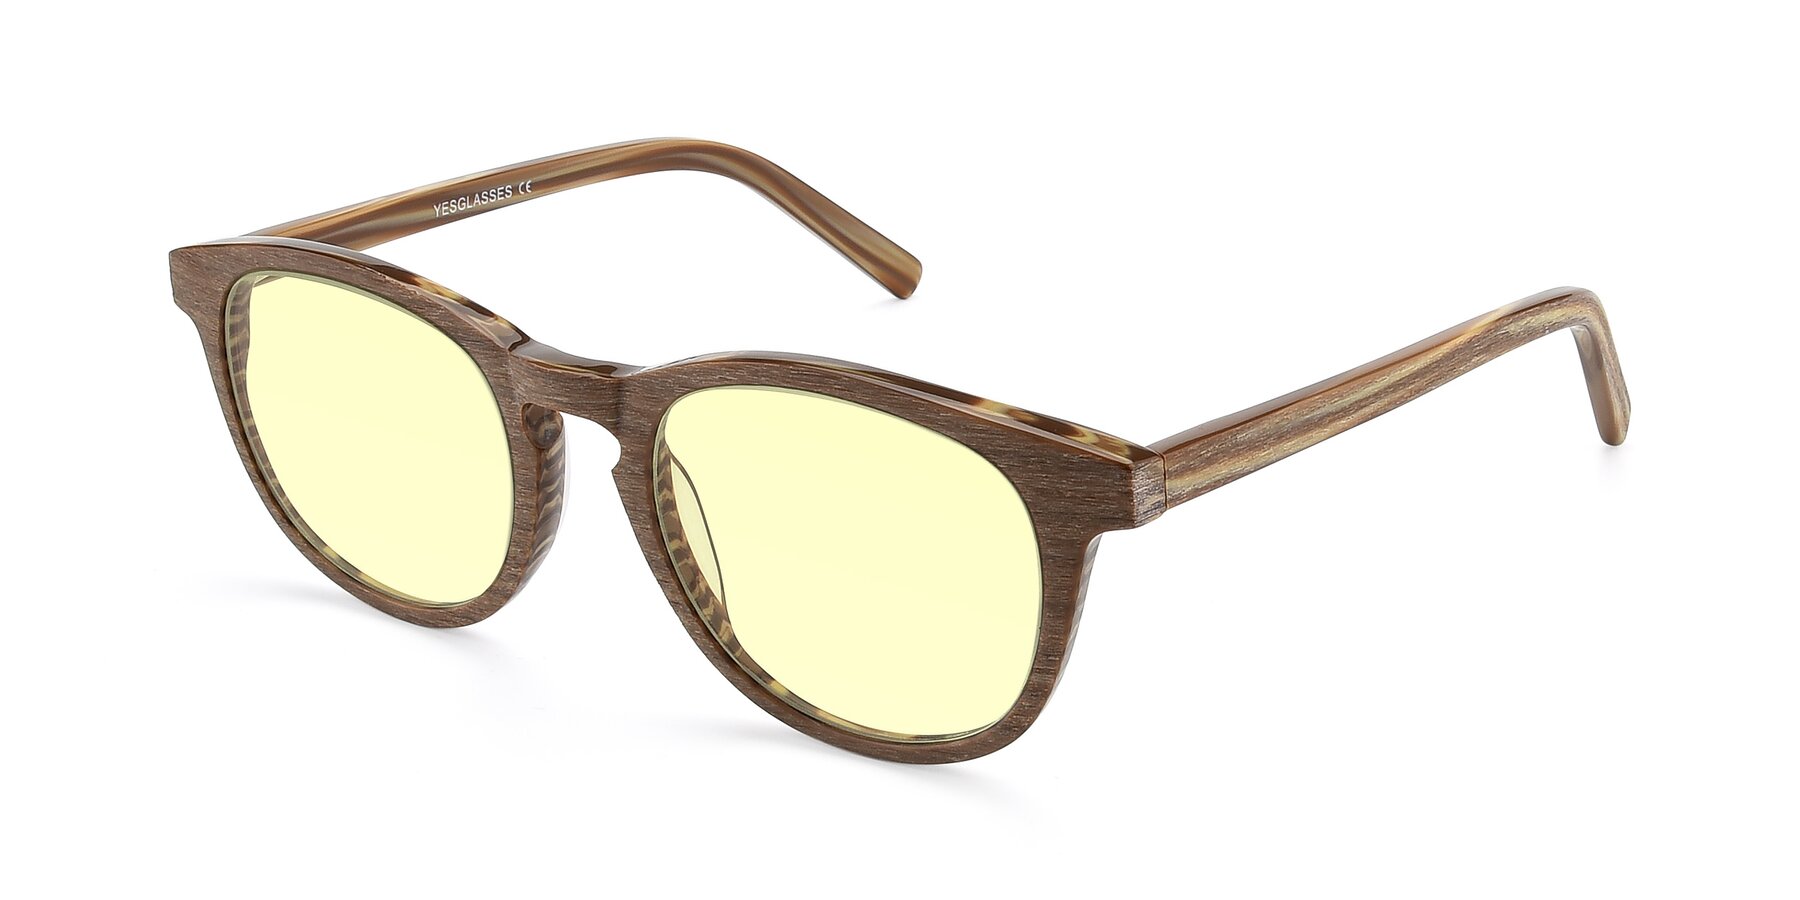 Angle of SR6044 in Brown-Wooden with Light Yellow Tinted Lenses